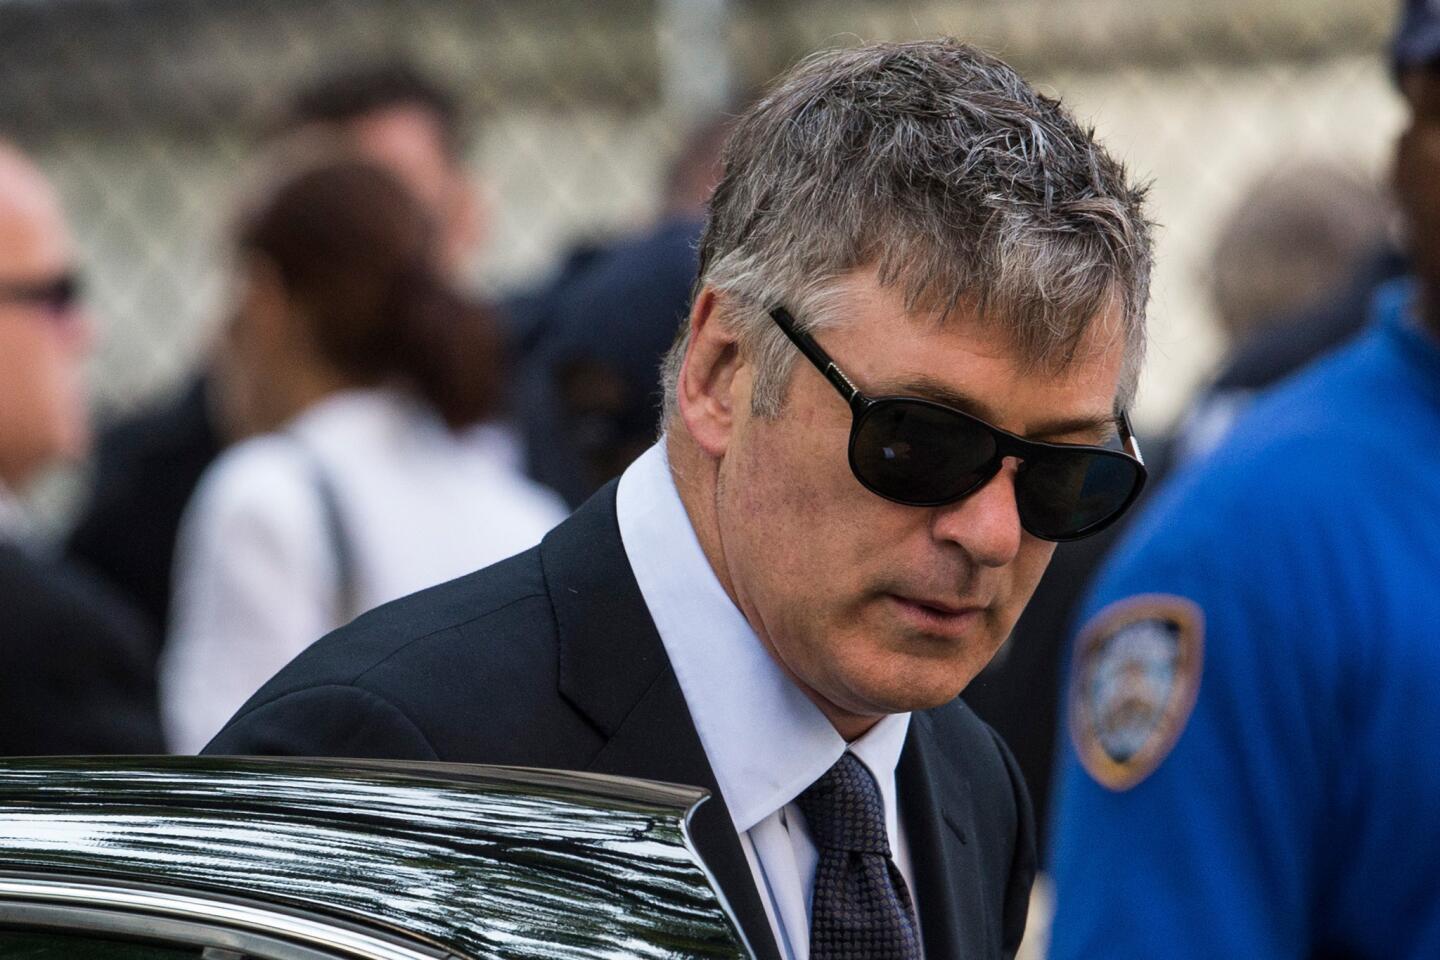 Alec Baldwin went on a homophobic, profanity-laden online rant in late June before shutting down his Alec Baldwin Foundation Twitter account, all in defense of his pregnant wife, Hilaria, whom a Daily Mail reporter had apparently errantly accused of tweeting while the couple attended James Gandolfini's funeral. Baldwin called Daily Mail writer George Stark a "toxic little queen" and "lying little bitch," and suggested Stark would enjoy forcible sodomy -- specifically a foot up the rear. The actor also threatened to find the writer and mess him up, only in more profane terms. All this against the backdrop of the tweeting story being off-base in the first place: Hilaria and Alec had left the funeral discreetly through a side door about 45 minutes in, after the eulogies but before Communion. The yoga instructor hadn't even had her phone with her, she said on Twitter. Turns out the writer didn't consider time zones when looking at time stamps on the tweets. MORE: Alec Baldwin loses it in Twitter rant, hurls homophobic slurs